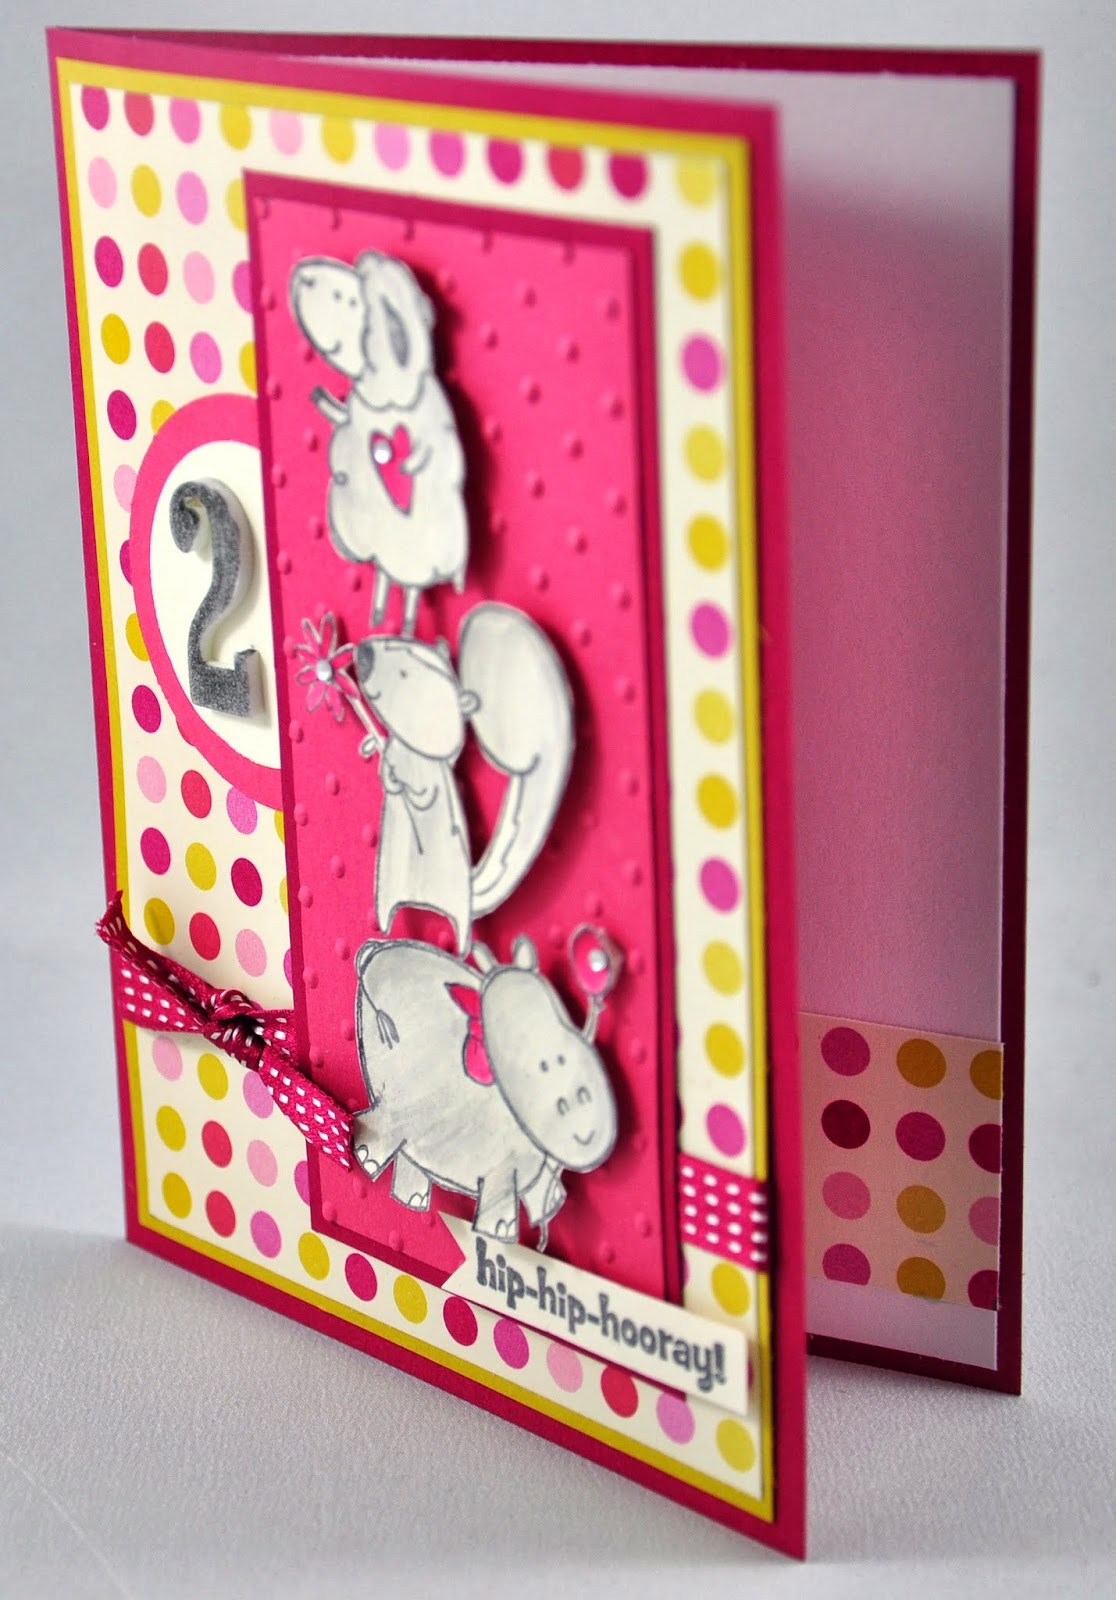 snippets-by-design-a-birthday-card-for-a-2-year-old